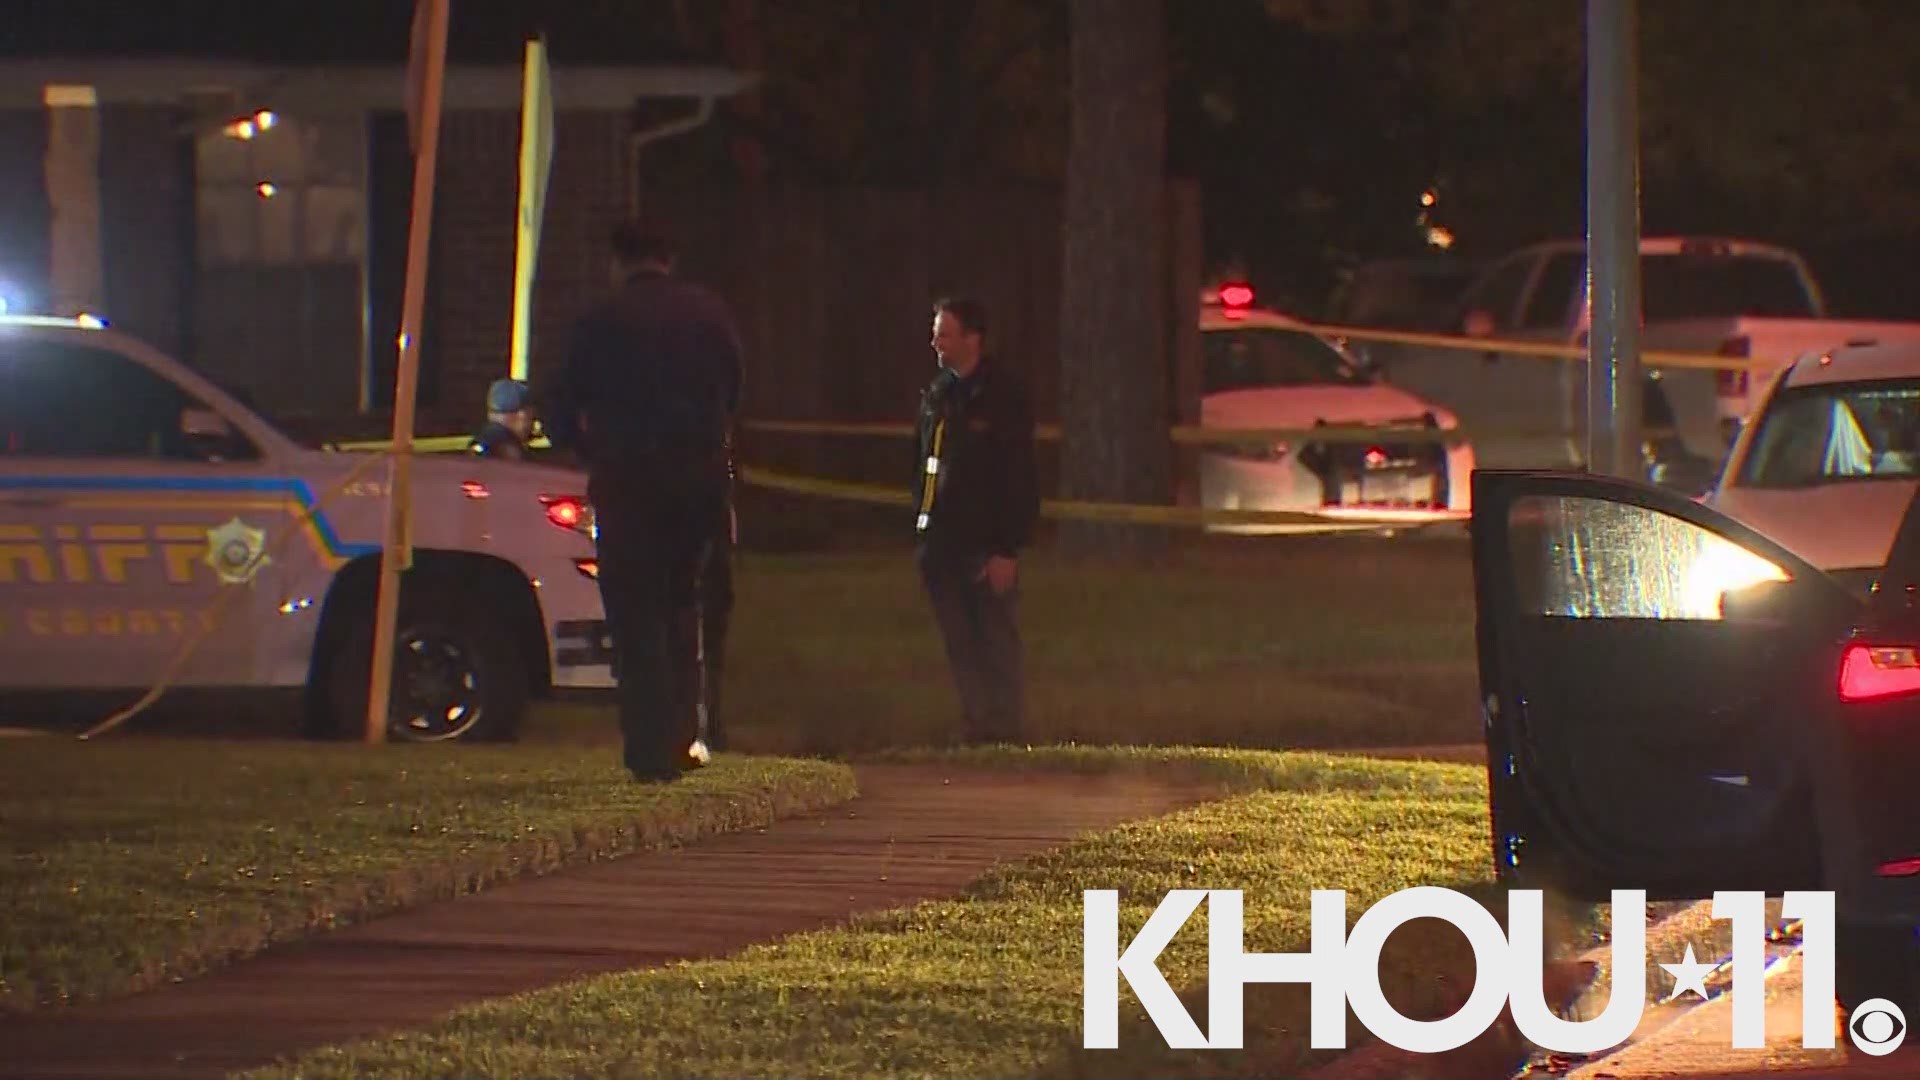 One woman was killed Friday night in what Harris County Sheriff's deputies say appears to be an accidental shooting.